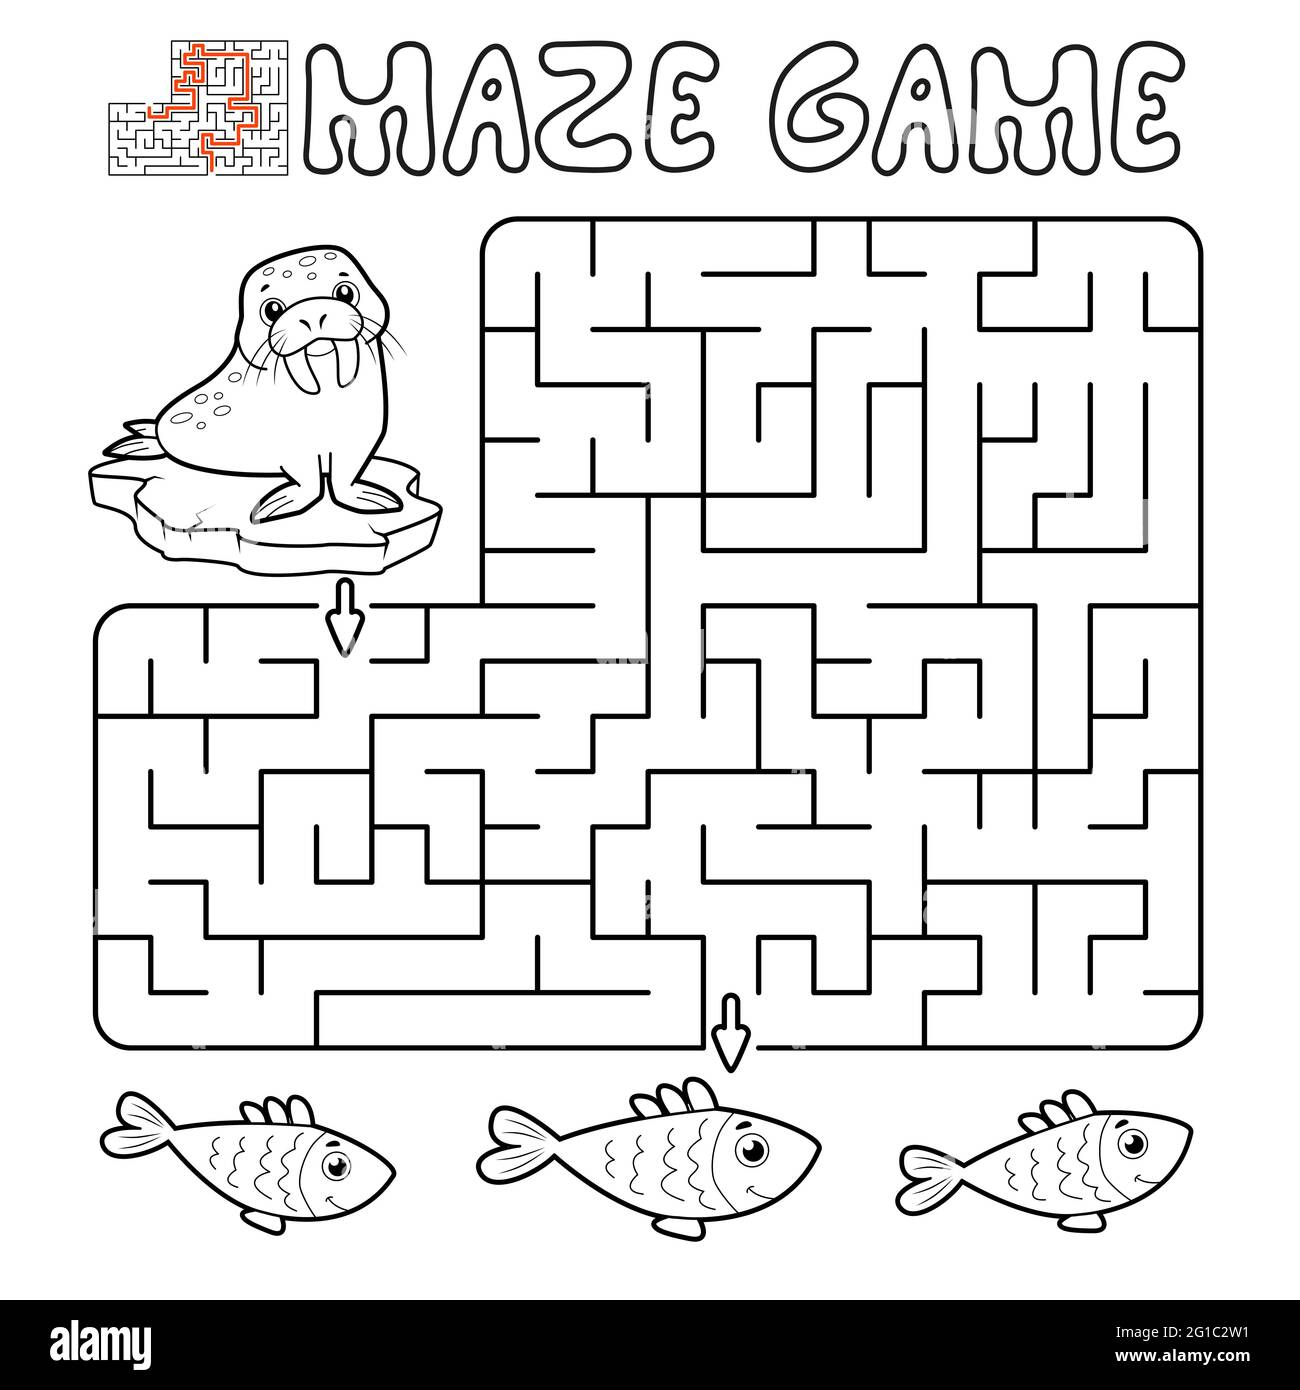 https://c8.alamy.com/comp/2G1C2W1/maze-puzzle-game-for-children-outline-maze-or-labyrinth-game-with-walrus-vector-illustrations-2G1C2W1.jpg